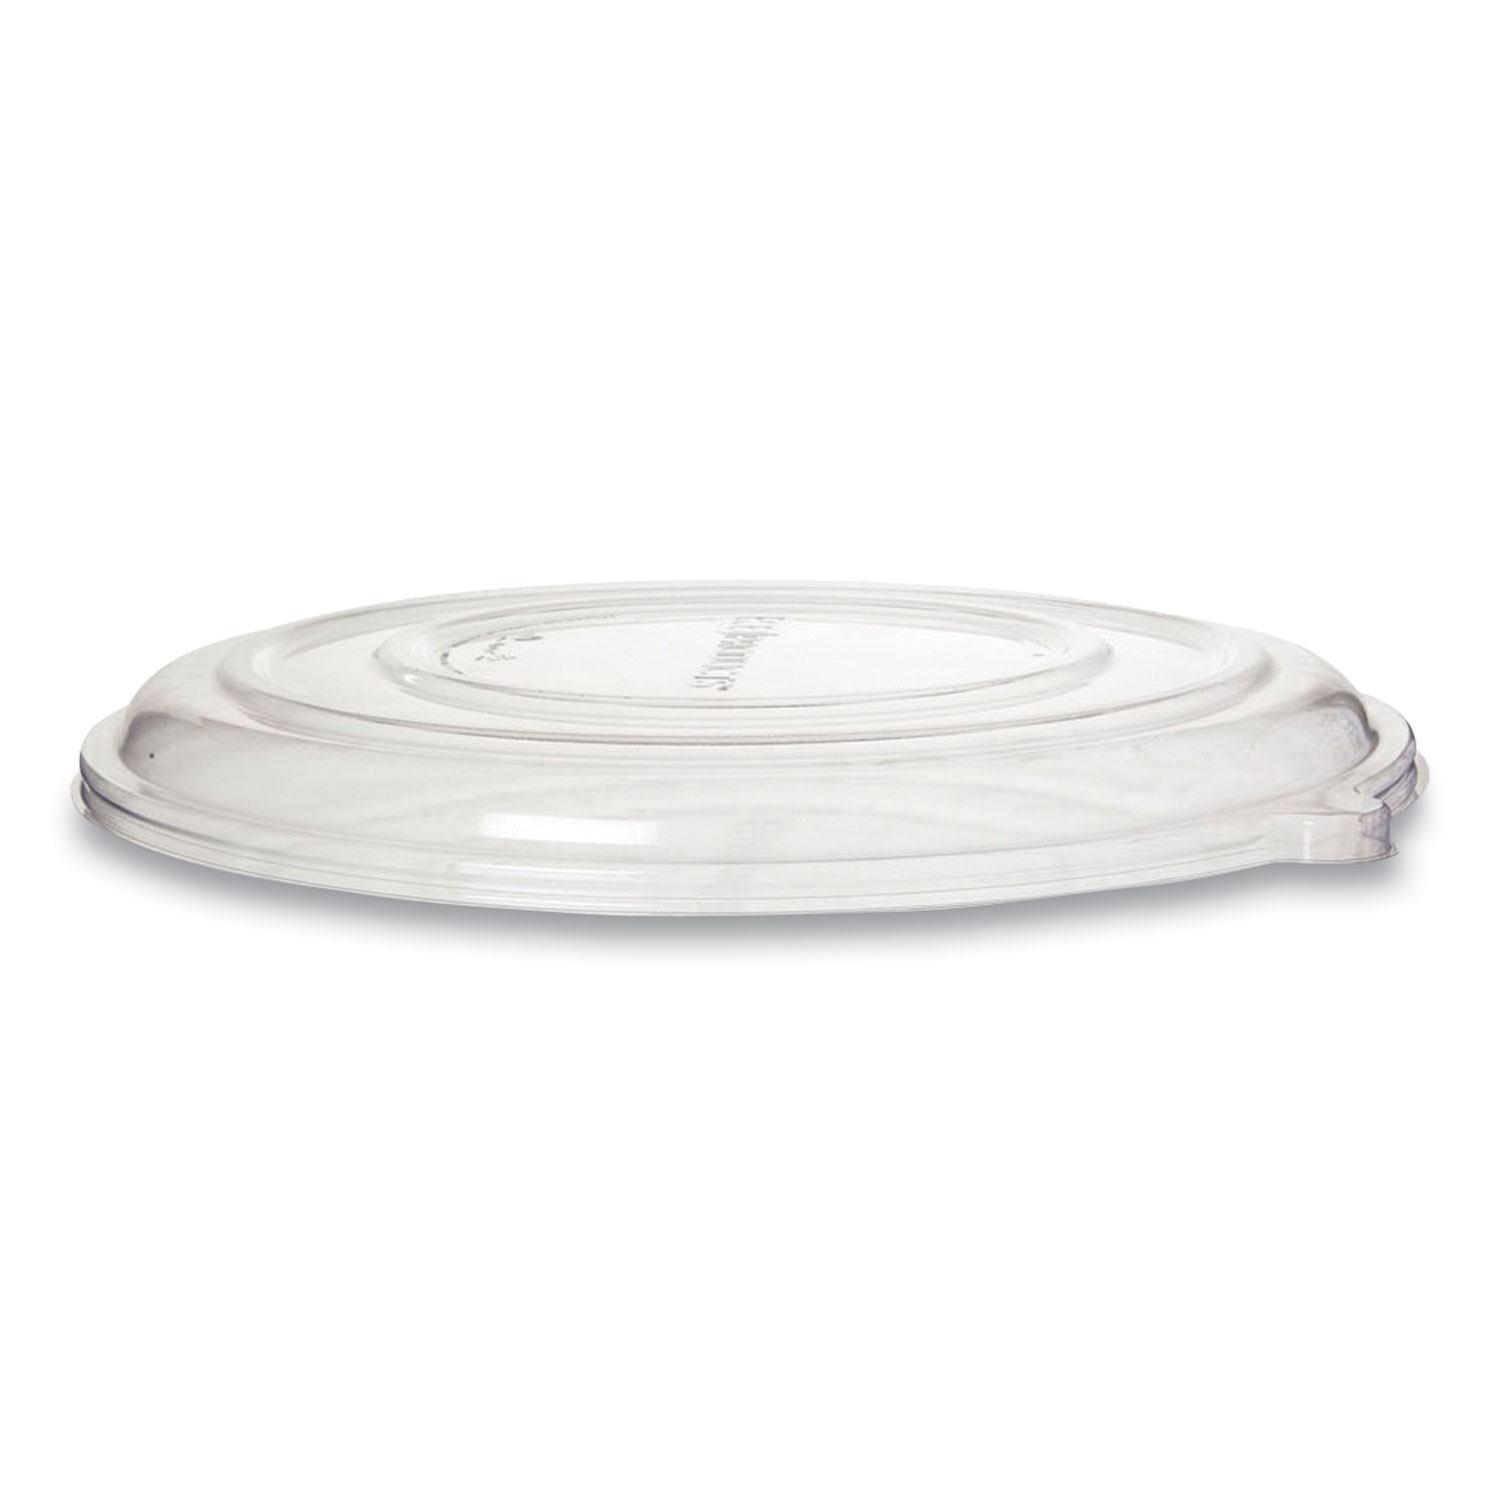  Eco-Products EP-SCPTR14LIDR 100% Recycled Content Pizza Tray Lids, 14 x 14 x 0.2, Clear, 50/Carton (ECOEPSCPTR14LID) 